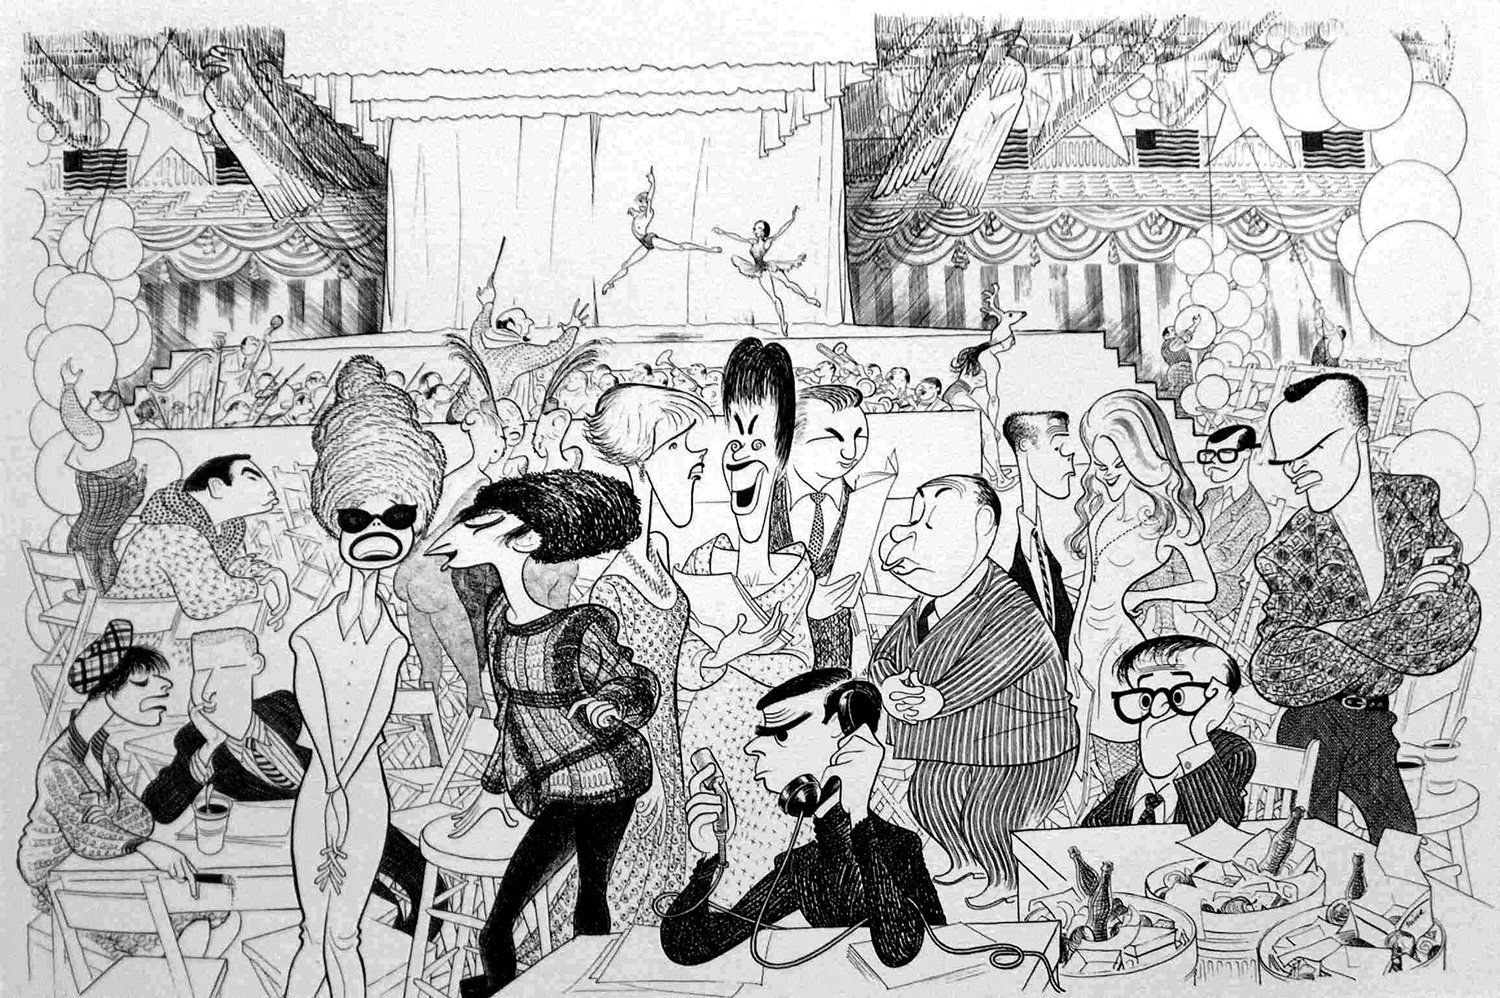 The great caricaturist, Al Hirschfeld, sketched all the stars who performed at Johnson's inauguration.